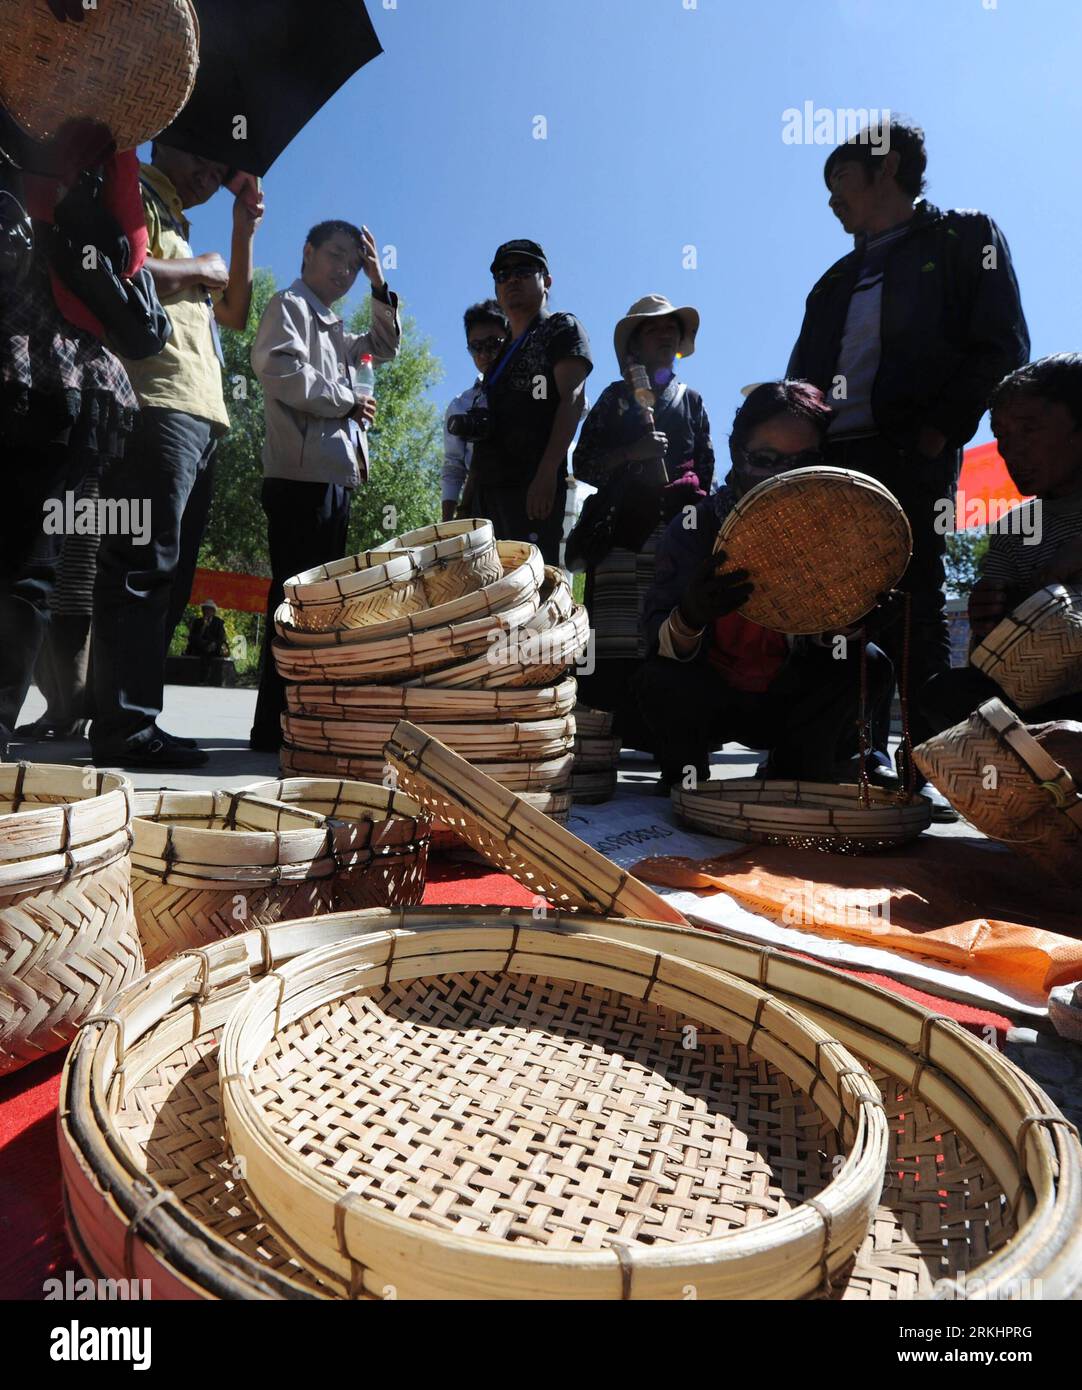 Bildnummer: 55890864  Datum: 03.09.2011  Copyright: imago/Xinhua (110903) -- LHASA, Sept. 3, 2011 (Xinhua) -- look at willow products, which are listed as one of the regional intangible cultural heritages, in Lhasa, southwest China s Tibet Autonomous Region, Sept. 3, 2011. An intangible cultural heritage show was held in Lhasa on Saturday to celebrate Shoton Festival this year. (Xinhua/Wen Tao) (mcg) CHINA-LHASA-SHOTON FESTIVAL-INTANGIBLE CULTURAL HERITAGE SHOW (CN) PUBLICATIONxNOTxINxCHN Gesellschaft xbs 2011 hoch o0 Objekte Flechtwerk Handwerk    Bildnummer 55890864 Date 03 09 2011 Copyright Stock Photo